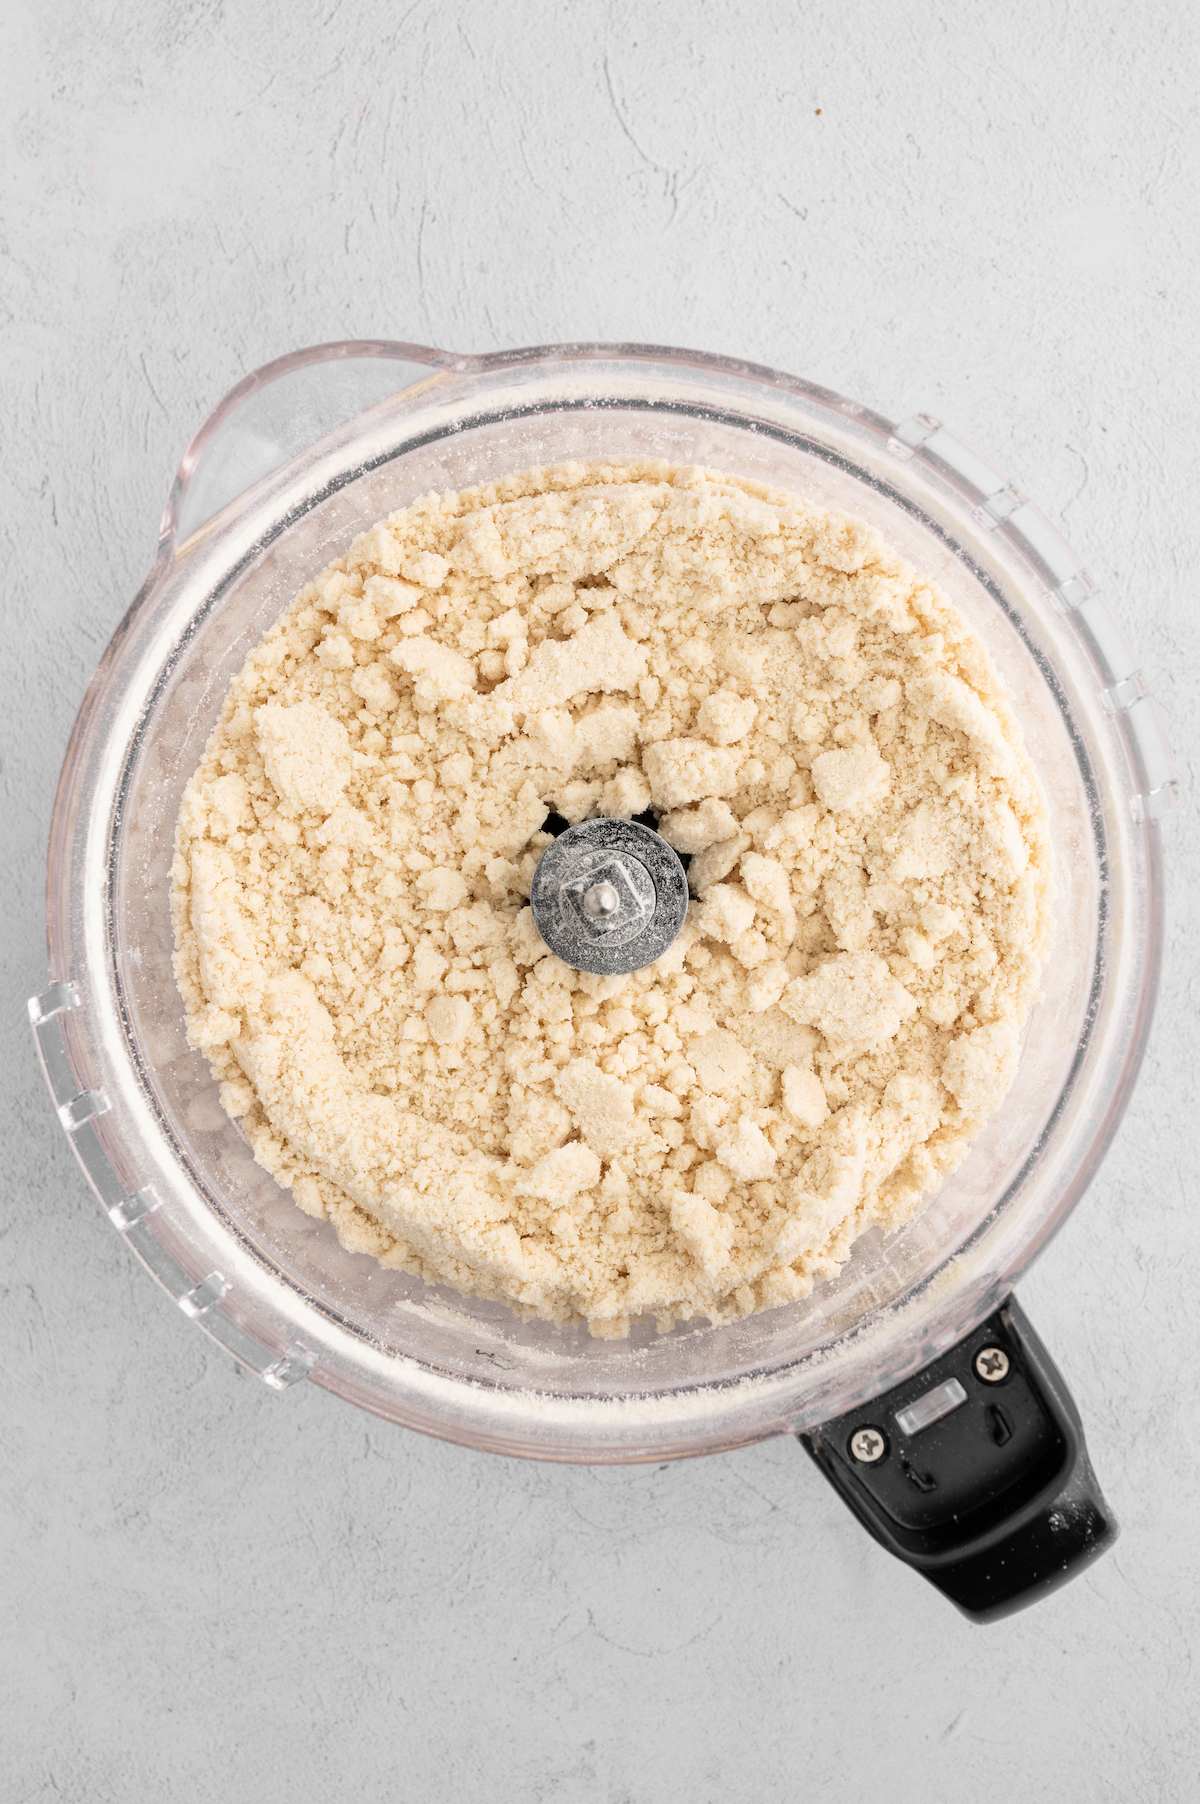 The crumbled vegan pie crust mixture in a food processor before adding water.